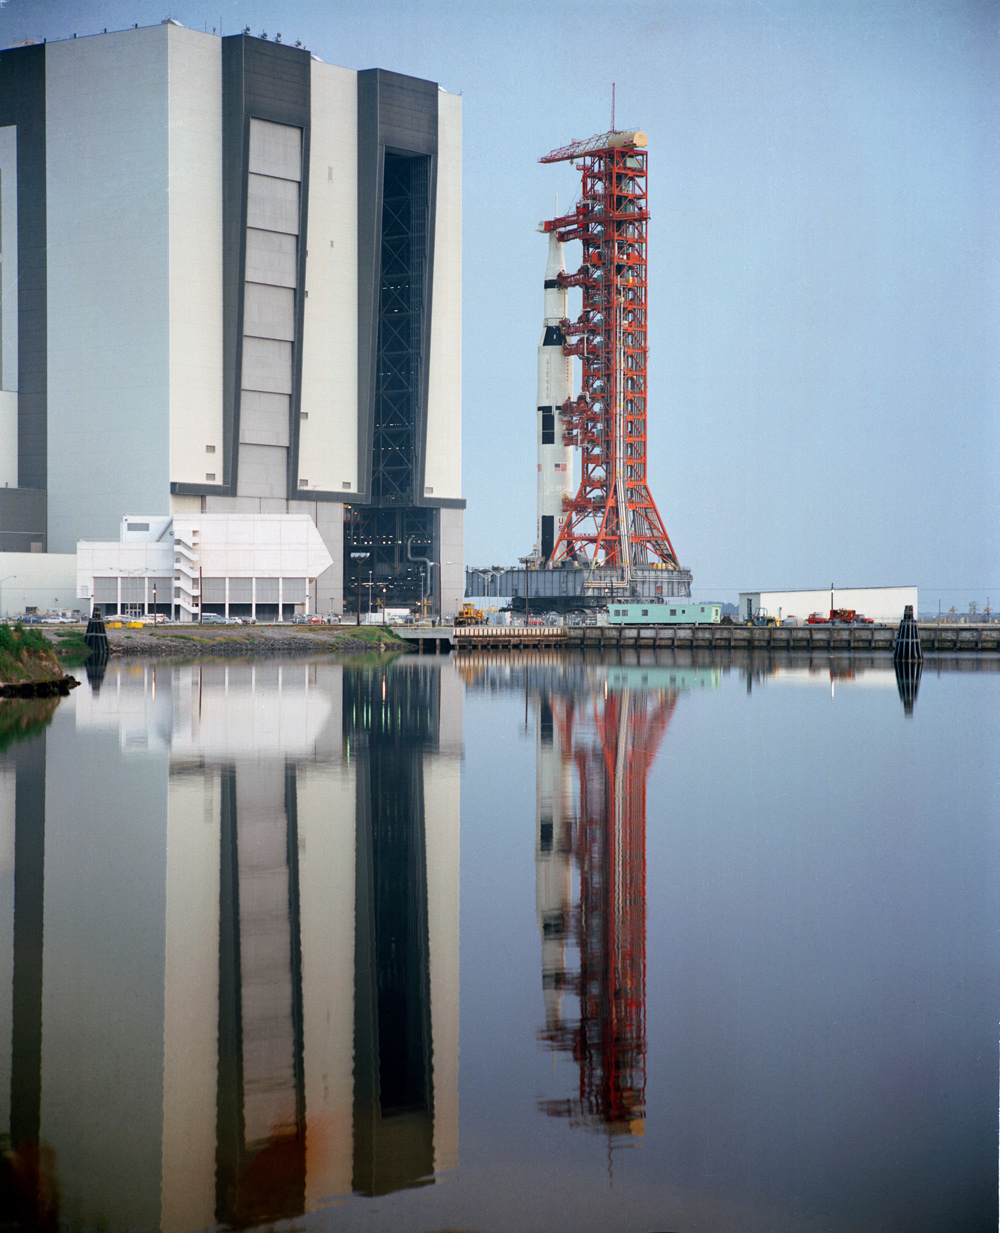 View of Apollo 15 space vehicle, and tall adjacent building, reflected in a smooth body of water.